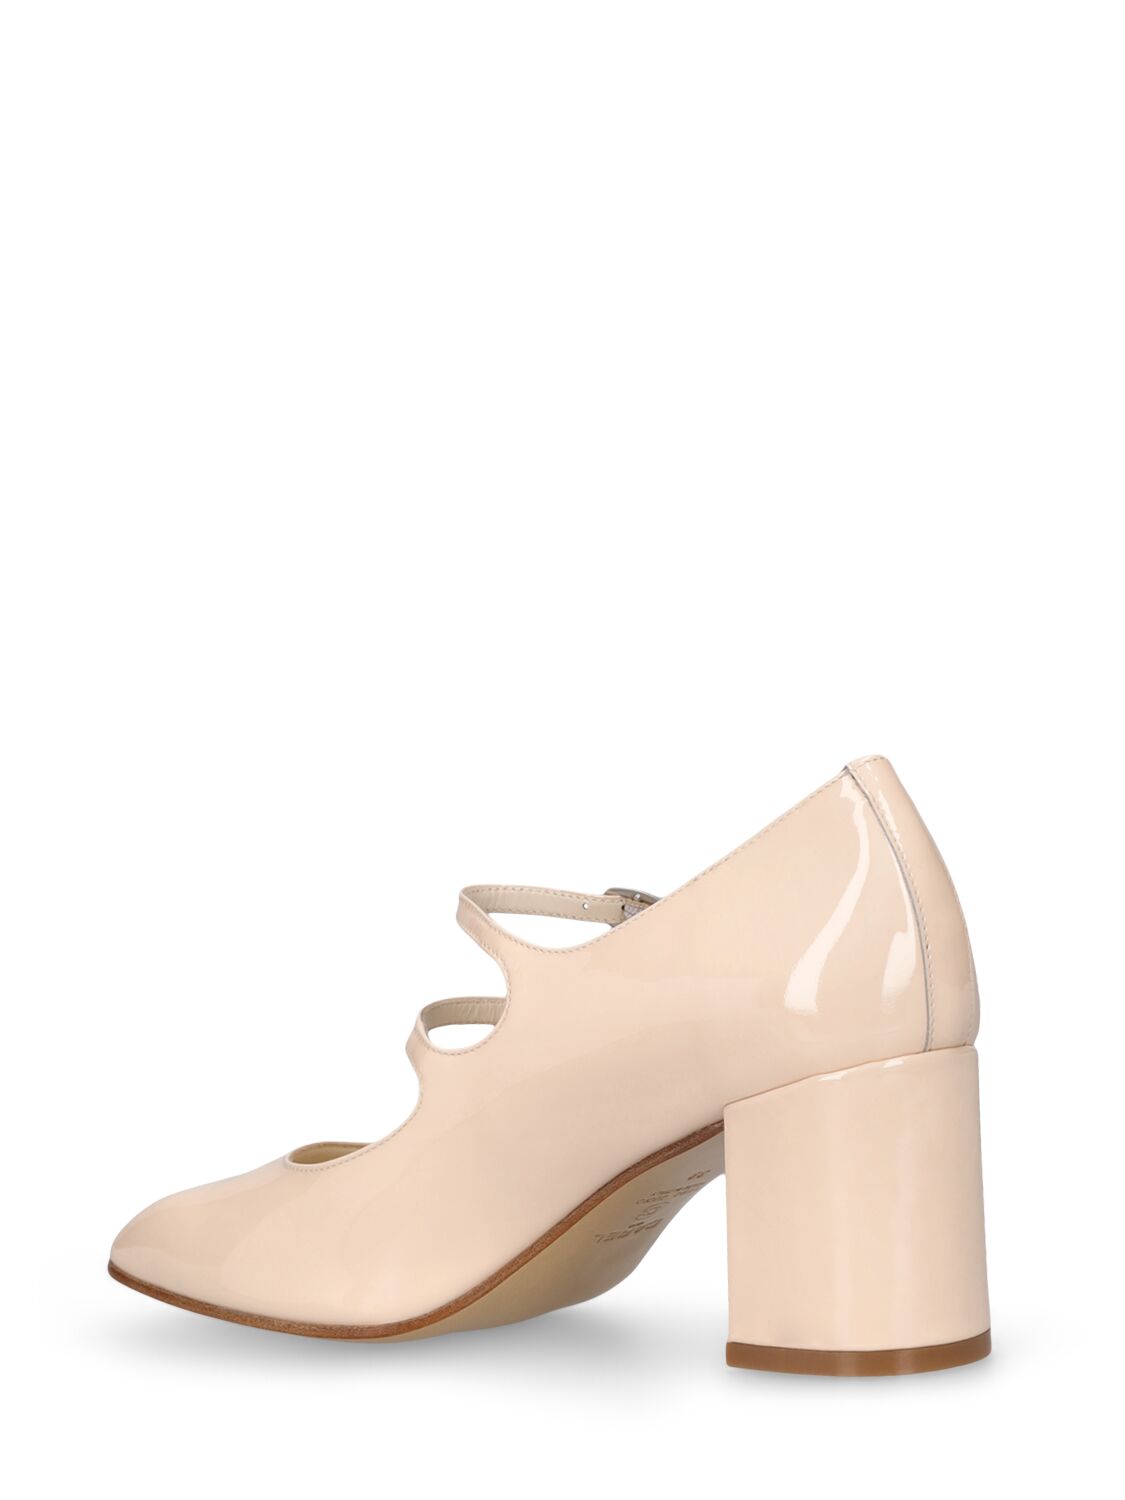 Shop Carel 60mm Alice Patent Leather Pumps In Nude